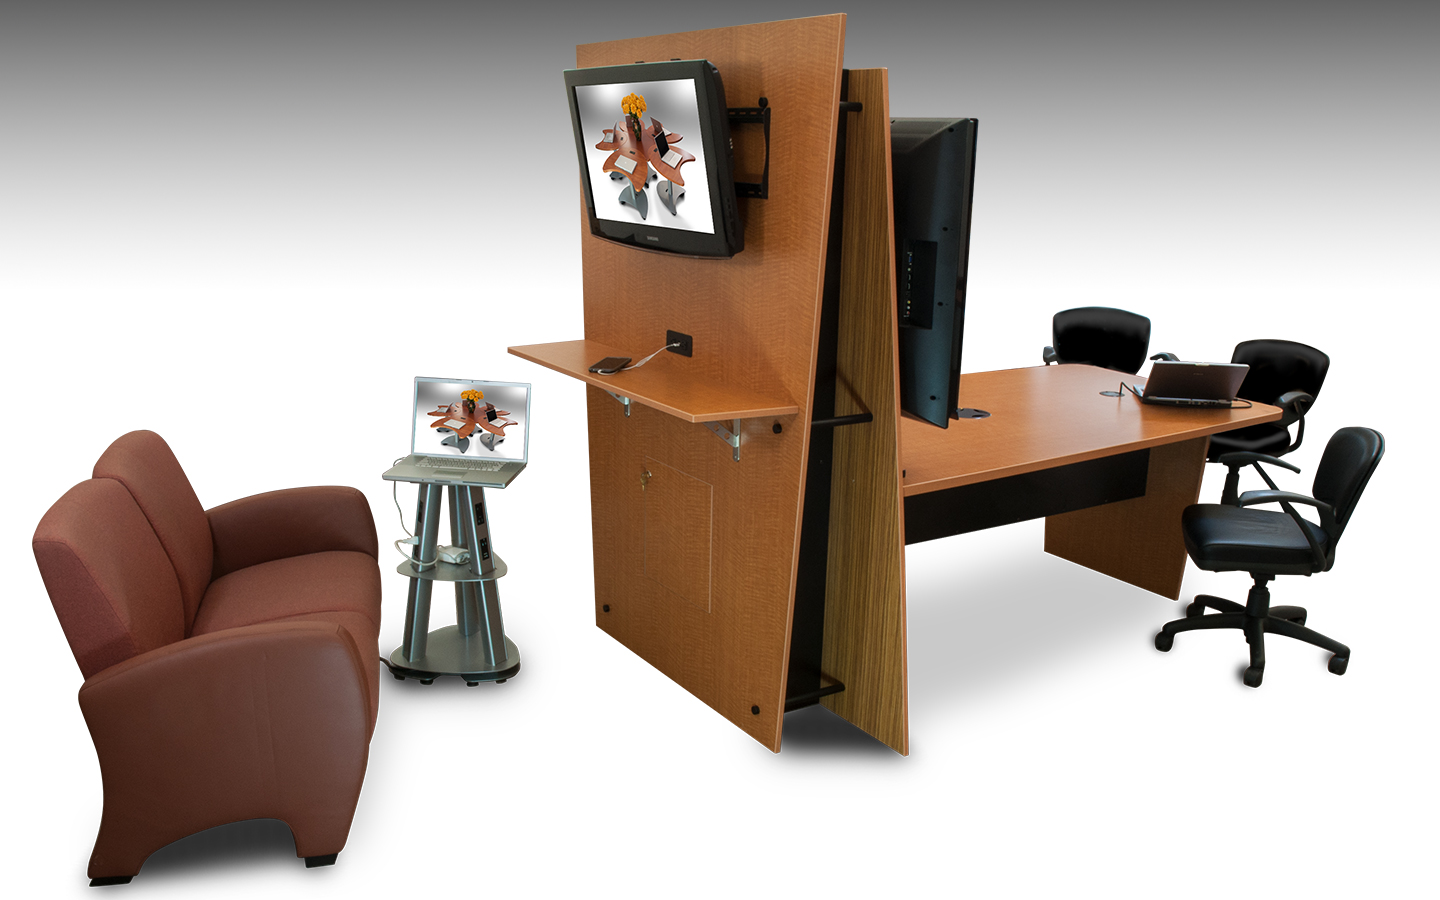 Purchase Ergonomic Furniture For The Office from SMARTdesks 800-770-7042